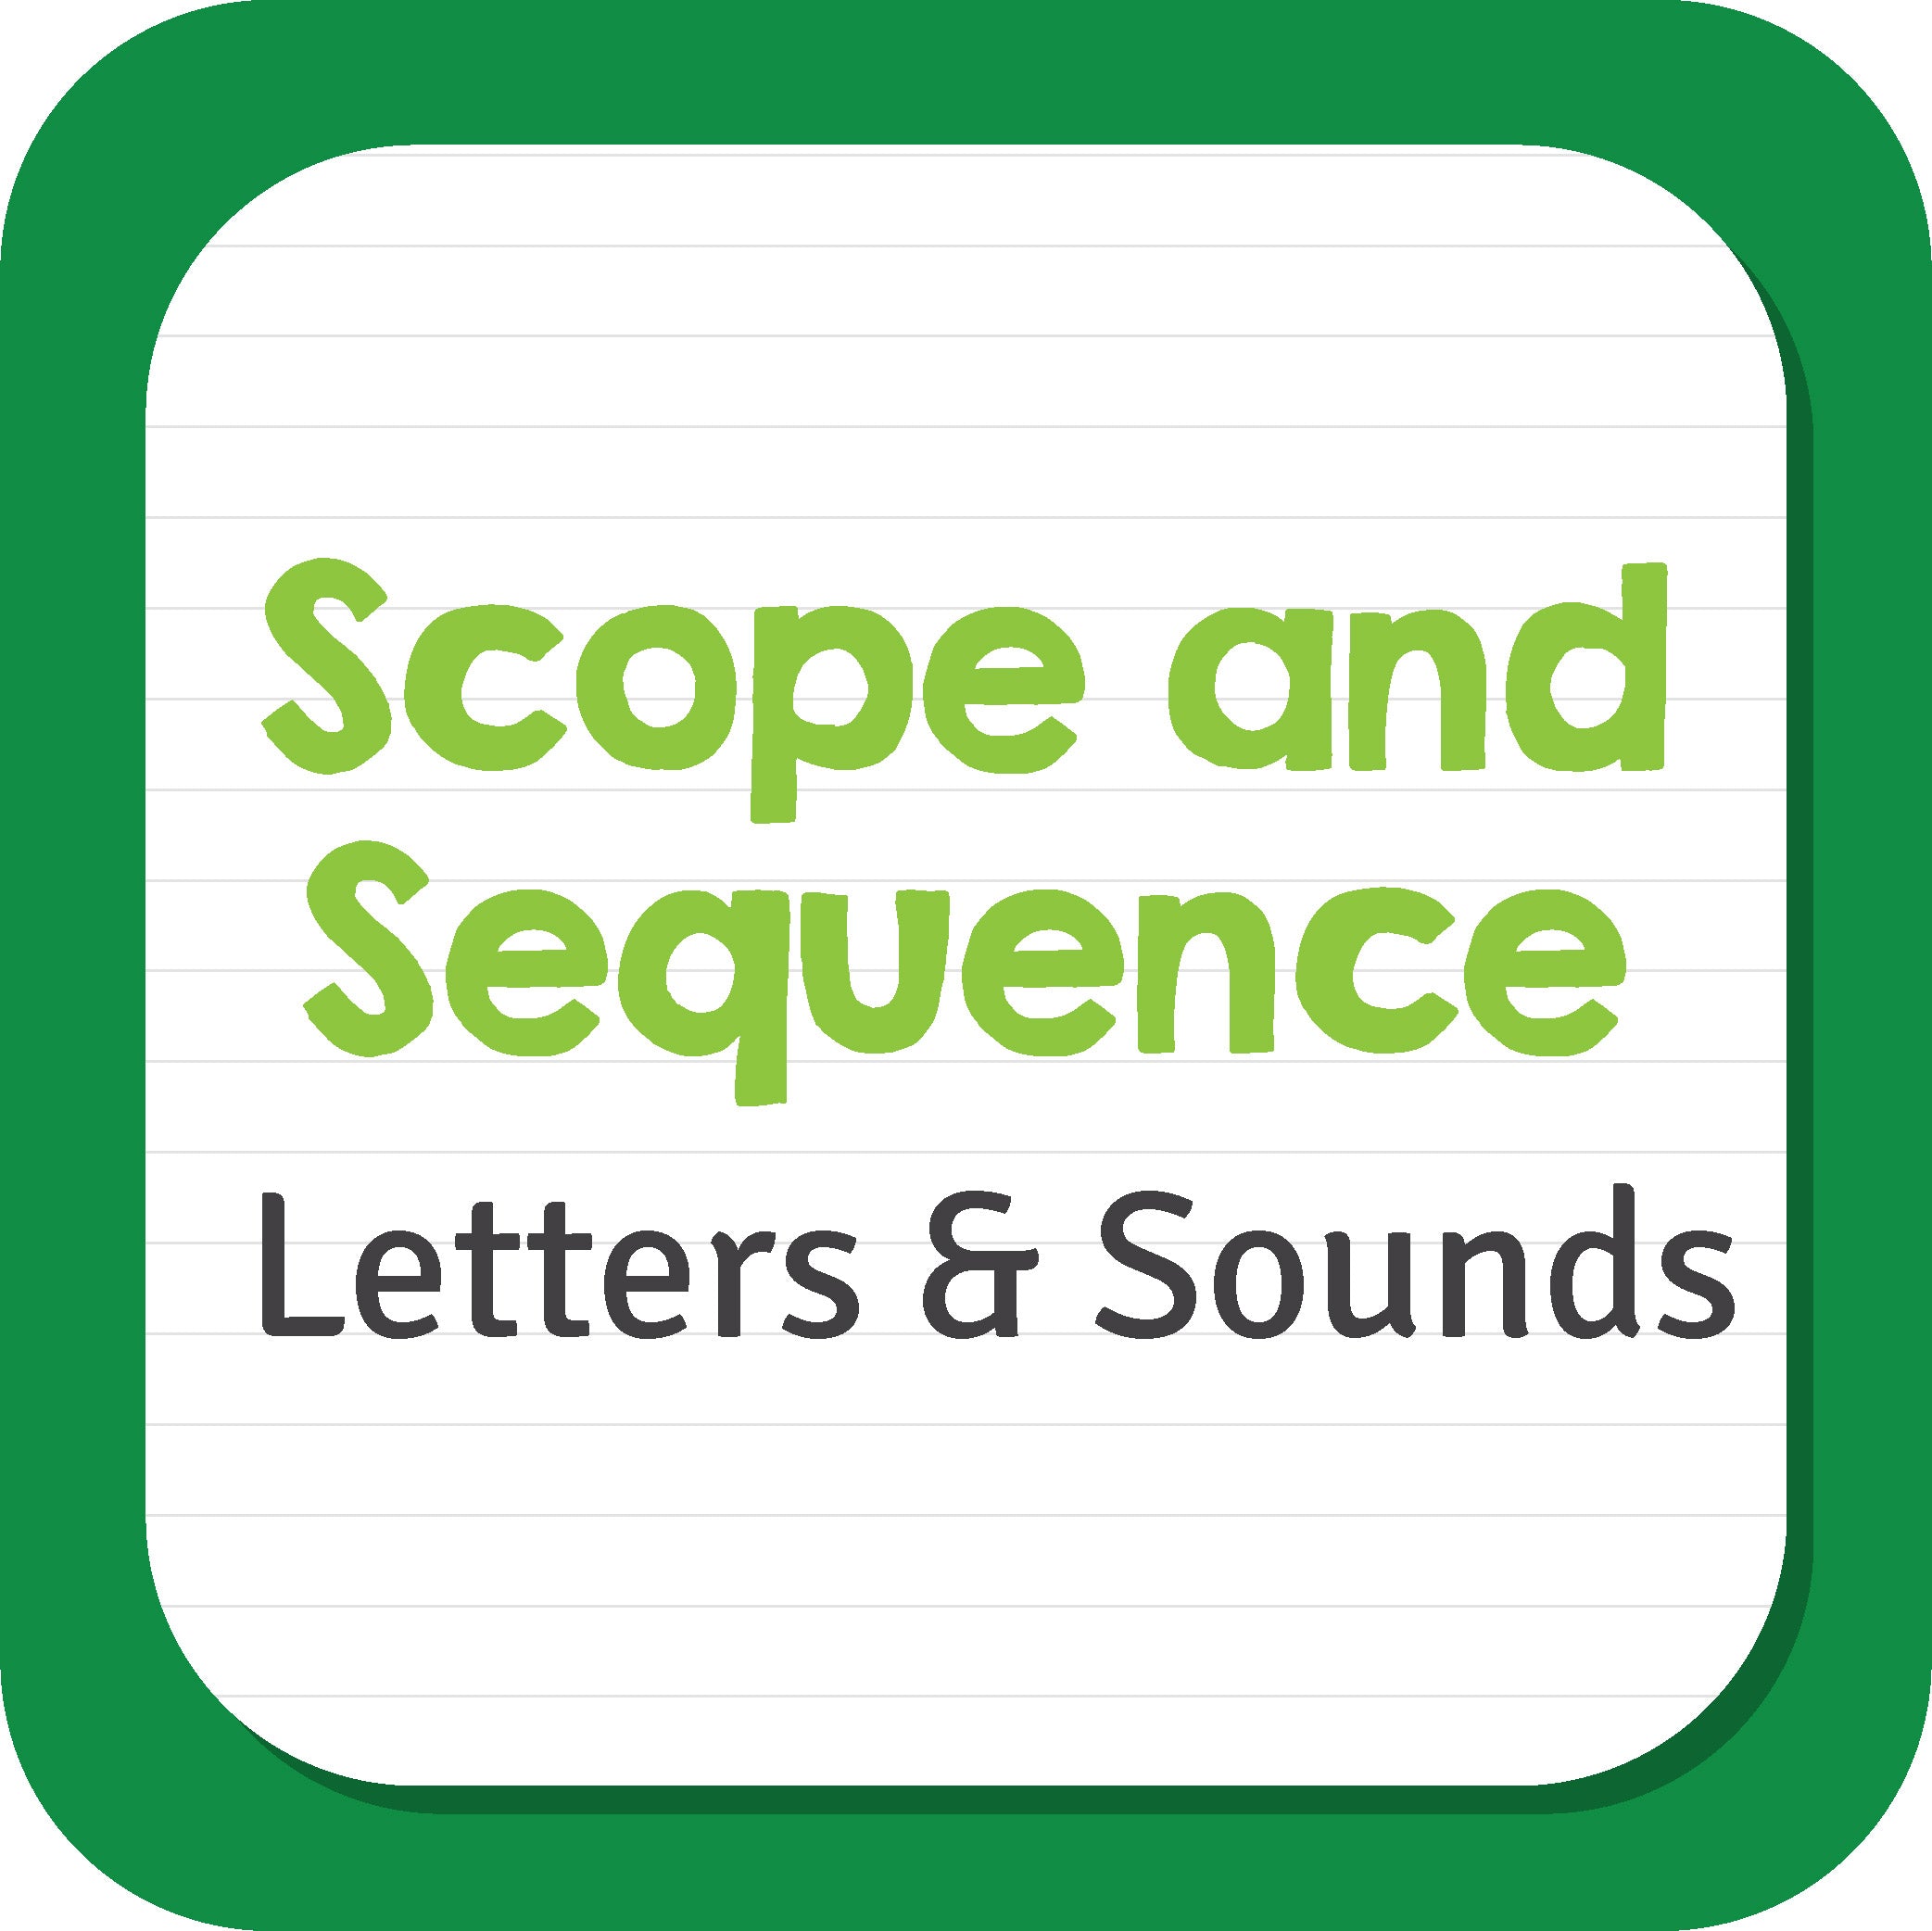 Letter & Sounds Scope and Sequence